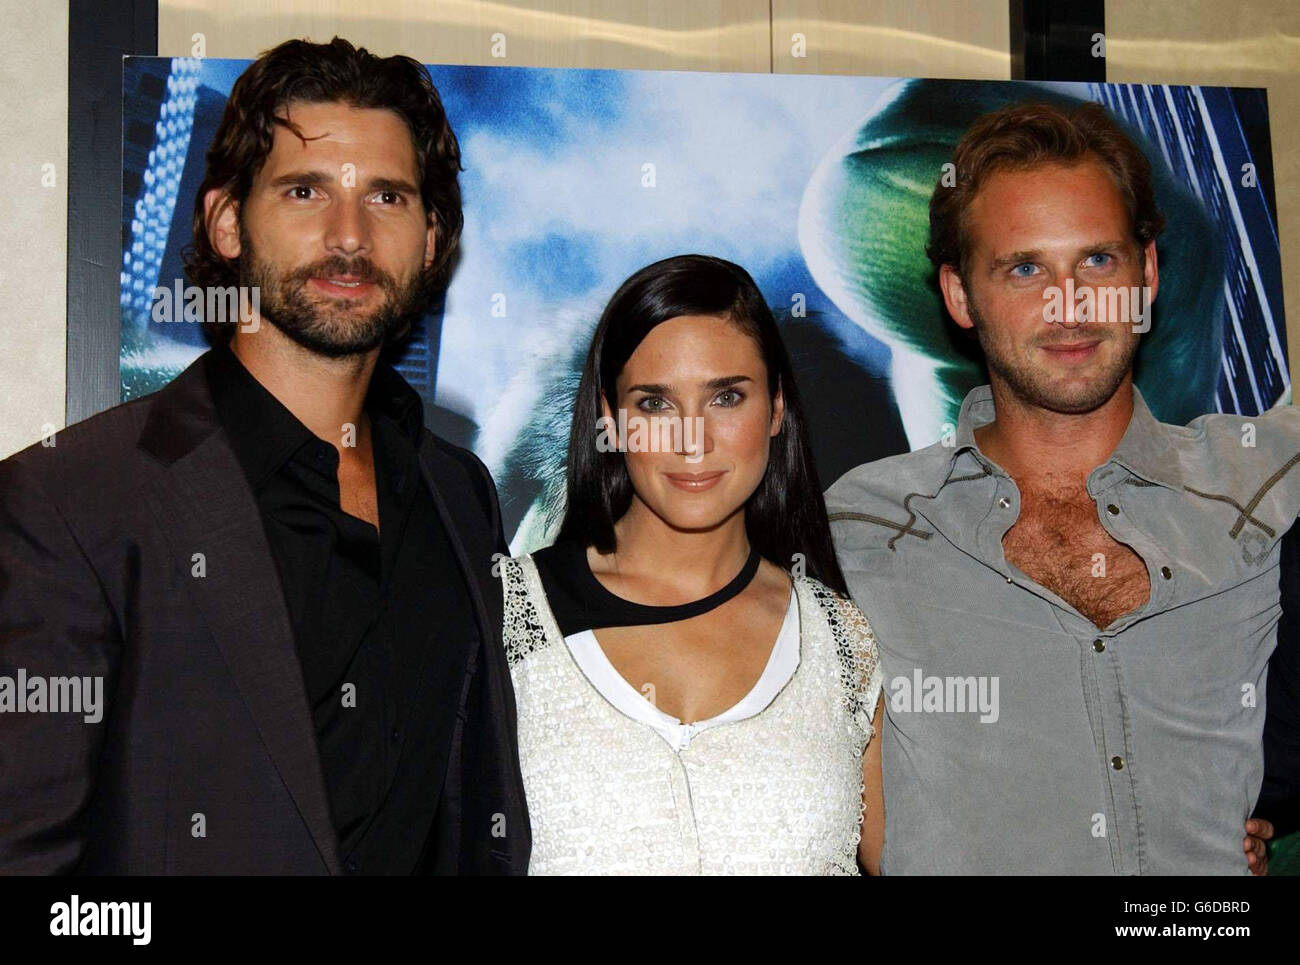 Eric Bana (left) who plays the Hulk with co-stars Jennifer Connelly, (Betty Ross) and Josh Lucas (Talbot) arrive at the premiere of The Hulk at the Empire cinema in London's Leicester Square. Stock Photo